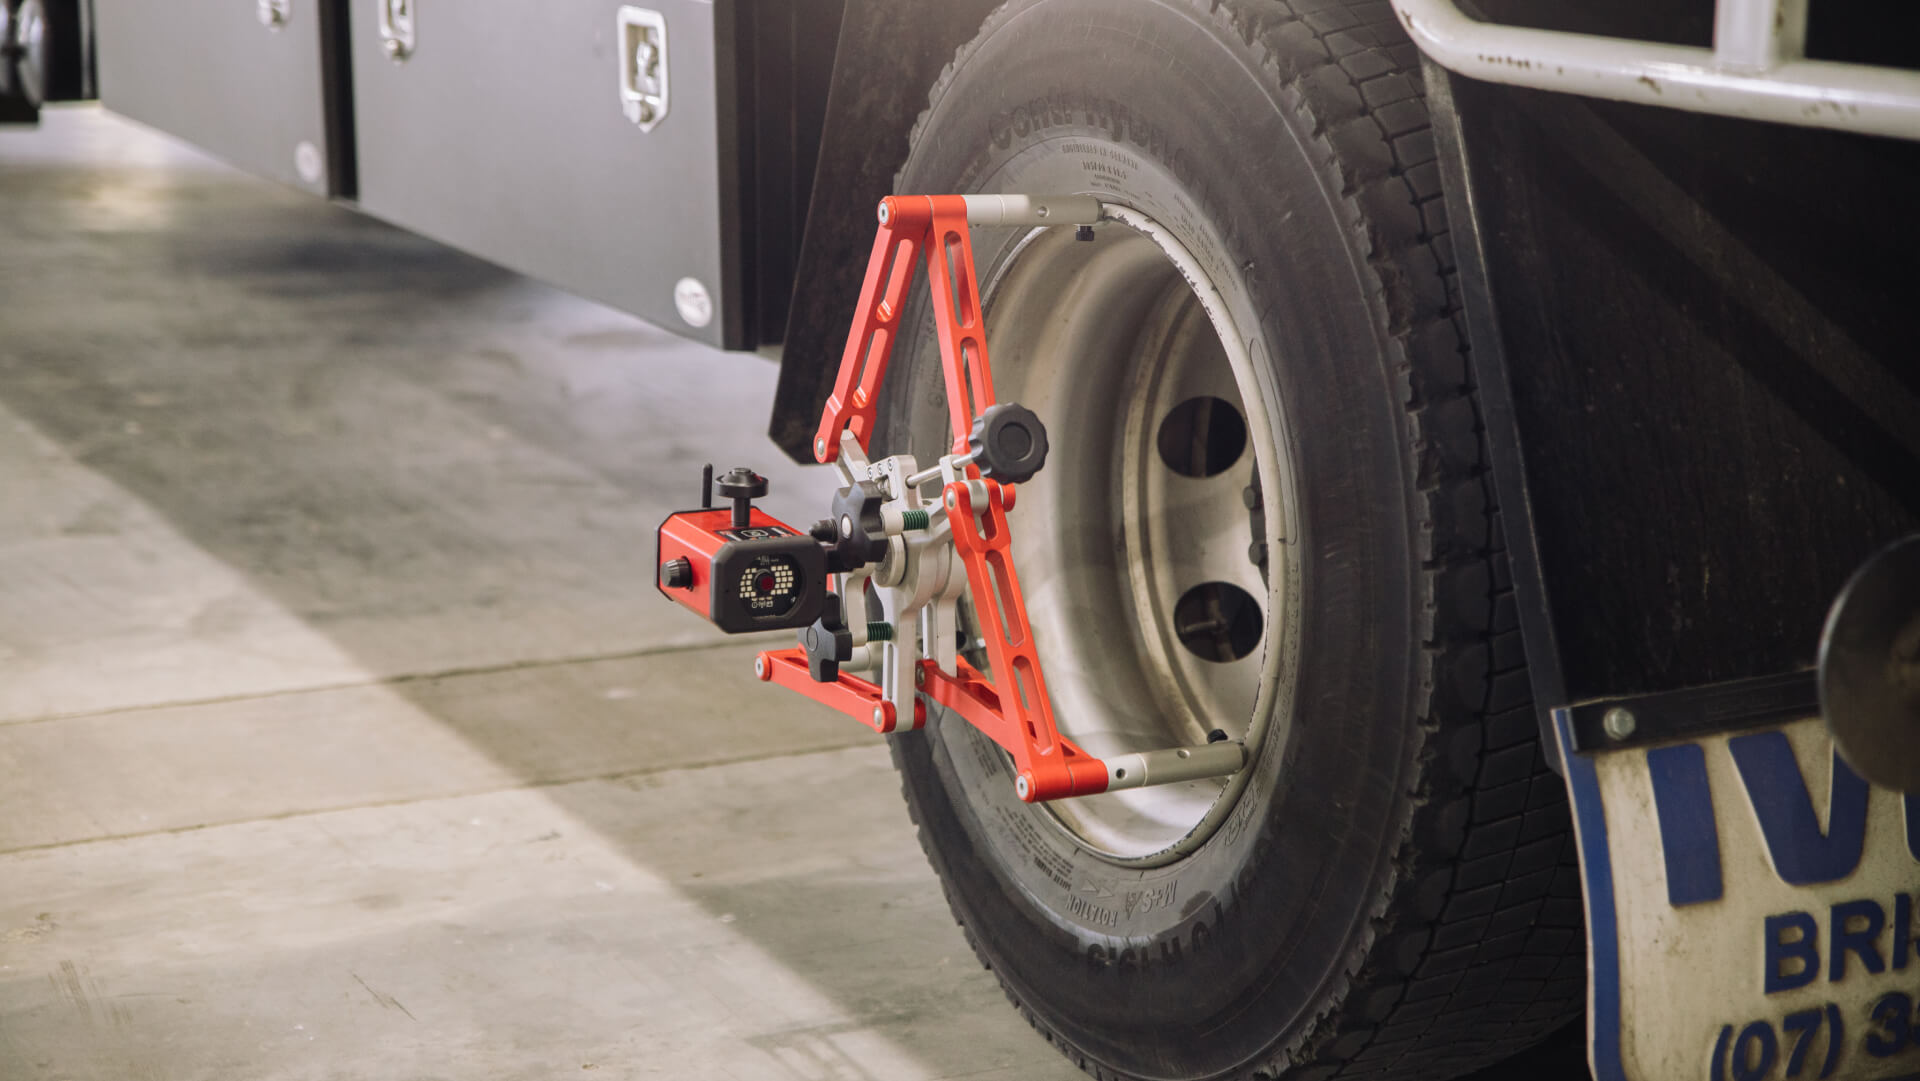 The importance of truck wheel alignments - As a heavy vehicle fleet operator, did you know that carrying out regular complete wheel alignments is one of the most effective ways to reduce operating costs?